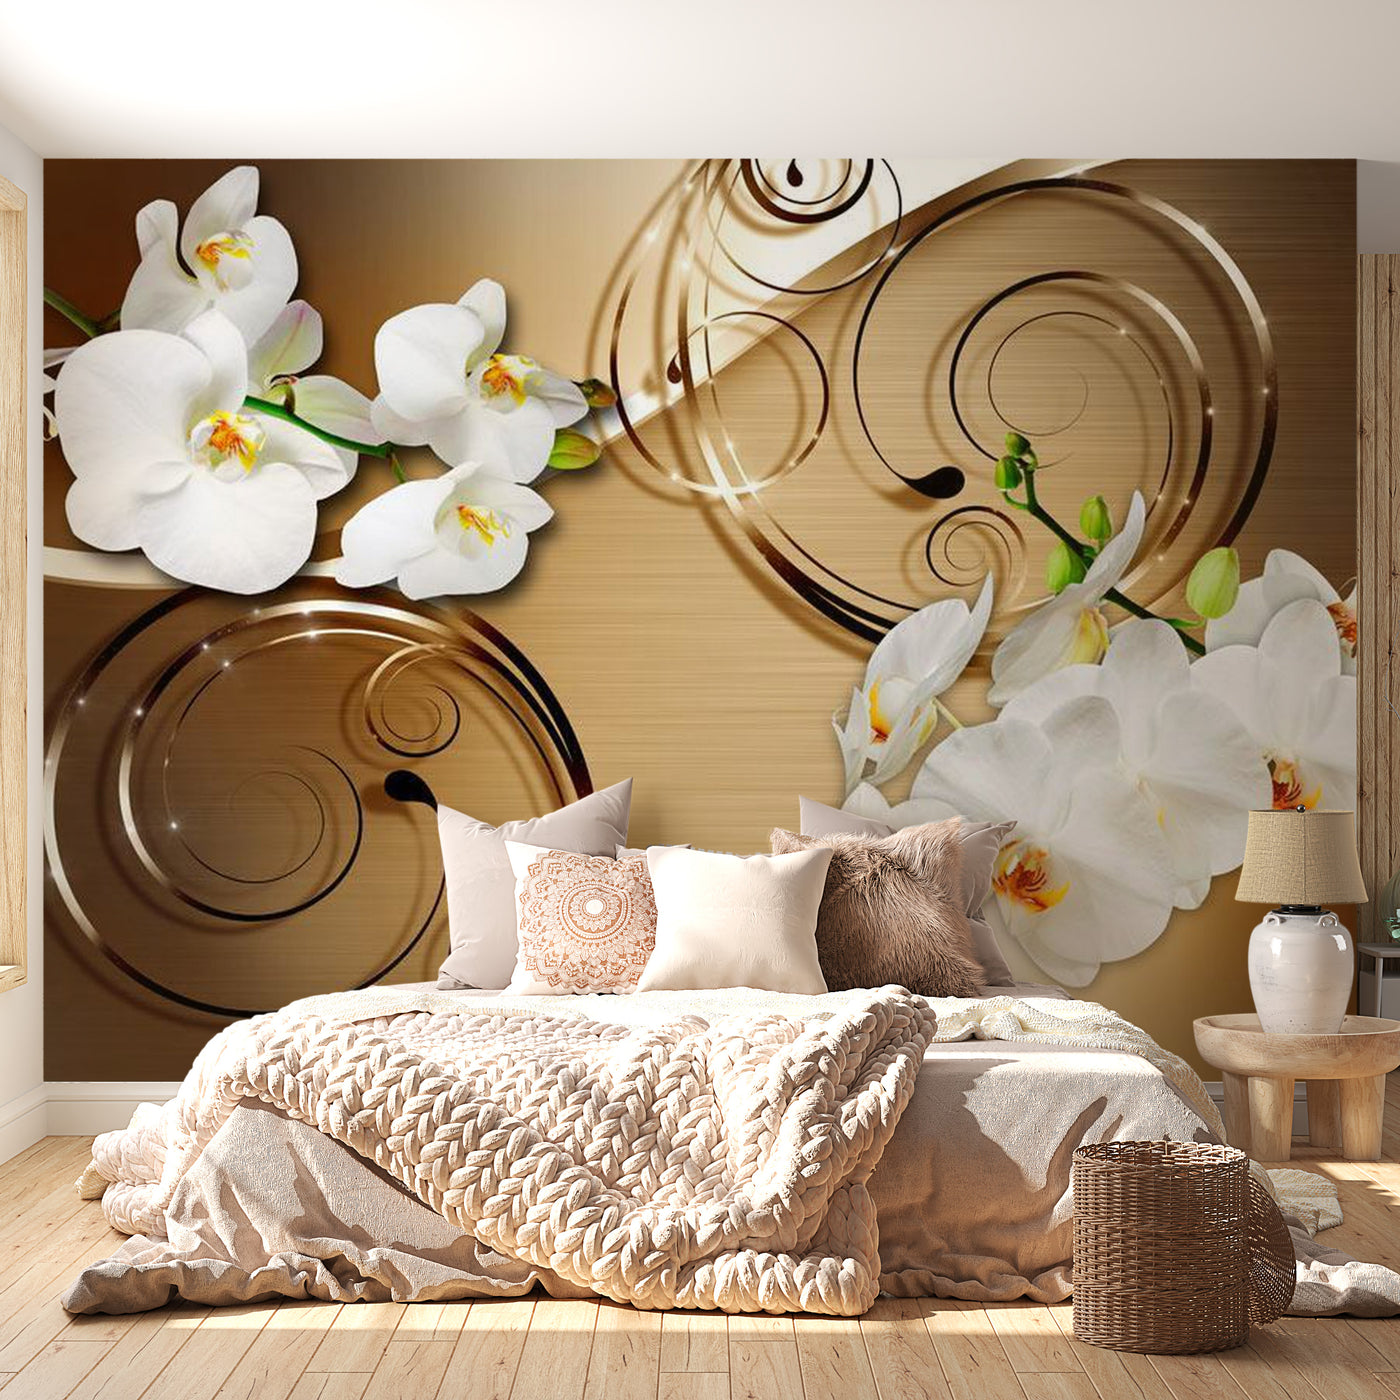 Peel & Stick Floral Wall Mural - Forbearance - Removable Wall Decals